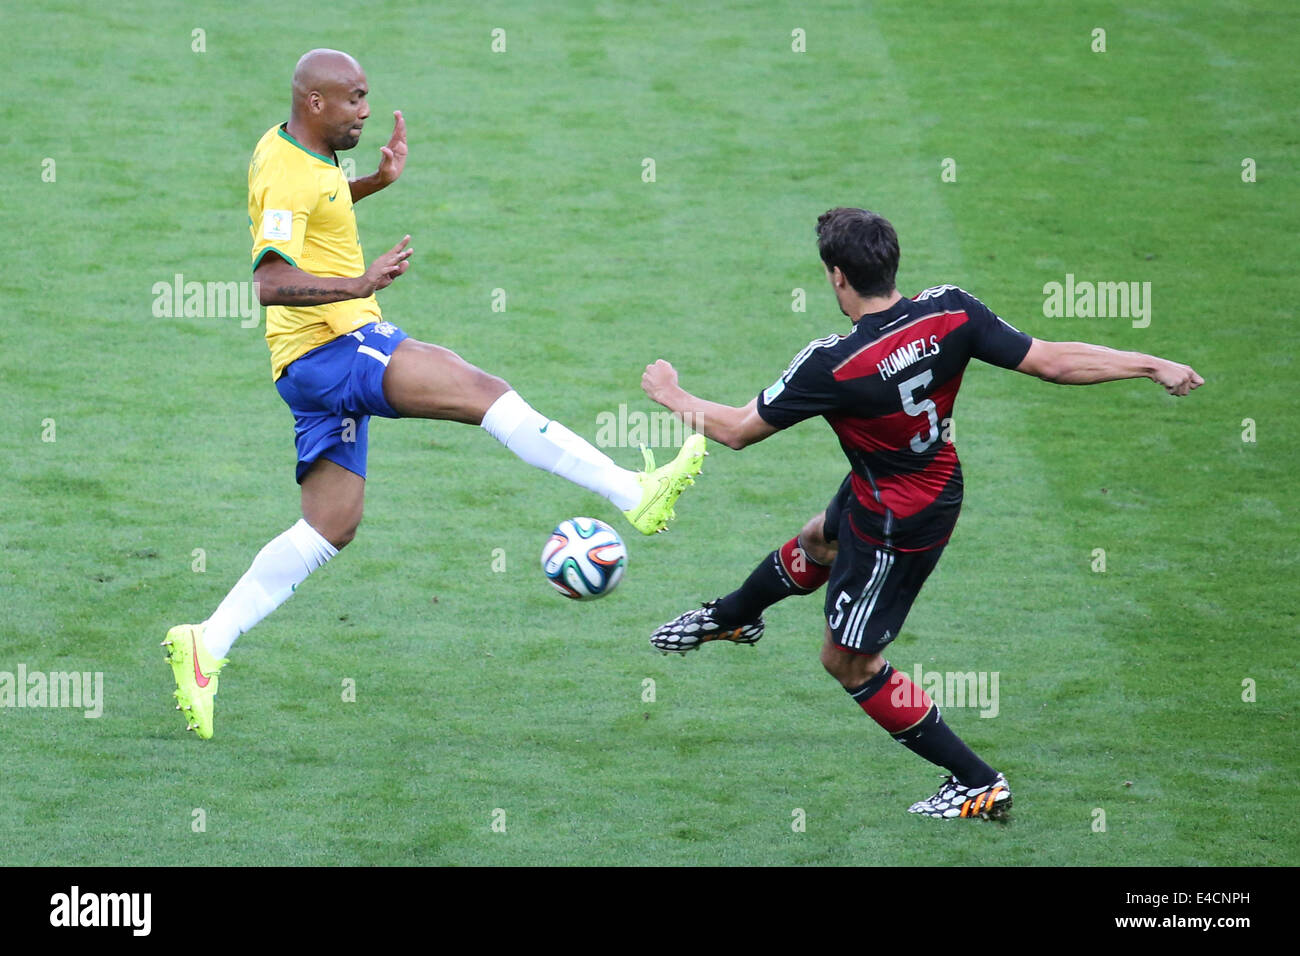 Belo Horizonte, Brazil. 8th July, 2014. Brazil's Maicon vies with Germany's Mats Hummels during a semifinal match between Brazil and Germany of 2014 FIFA World Cup at the Estadio Mineirao Stadium in Belo Horizonte, Brazil, on July 8, 2014. Credit:  Li Ming/Xinhua/Alamy Live News Stock Photo